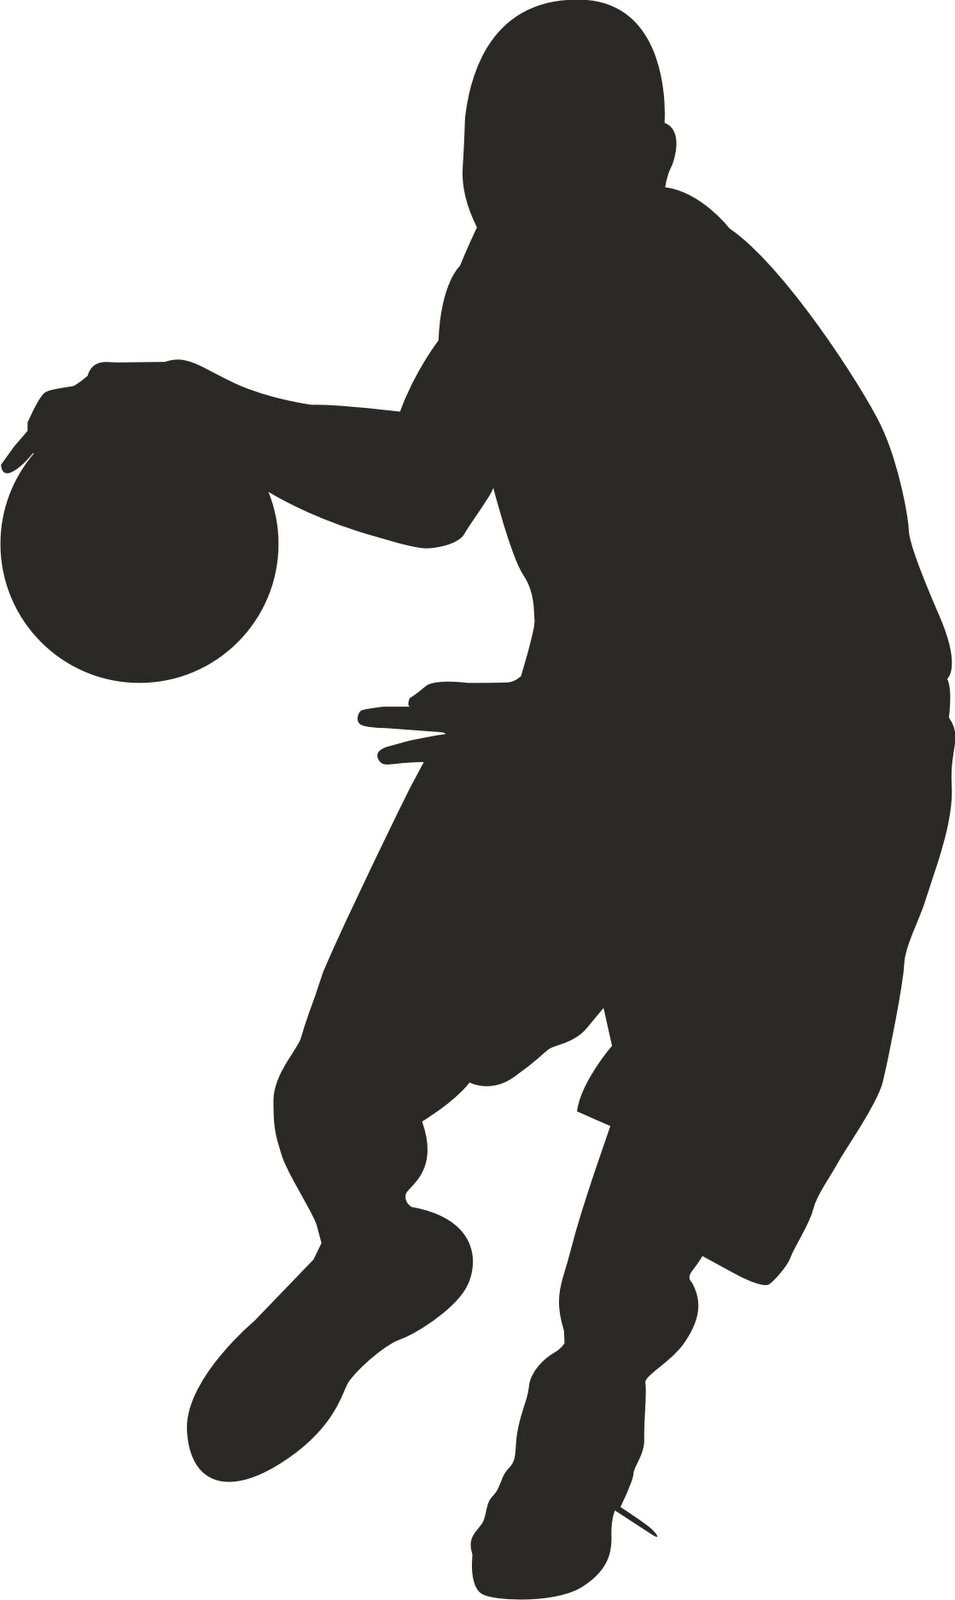 New basketball clipart image